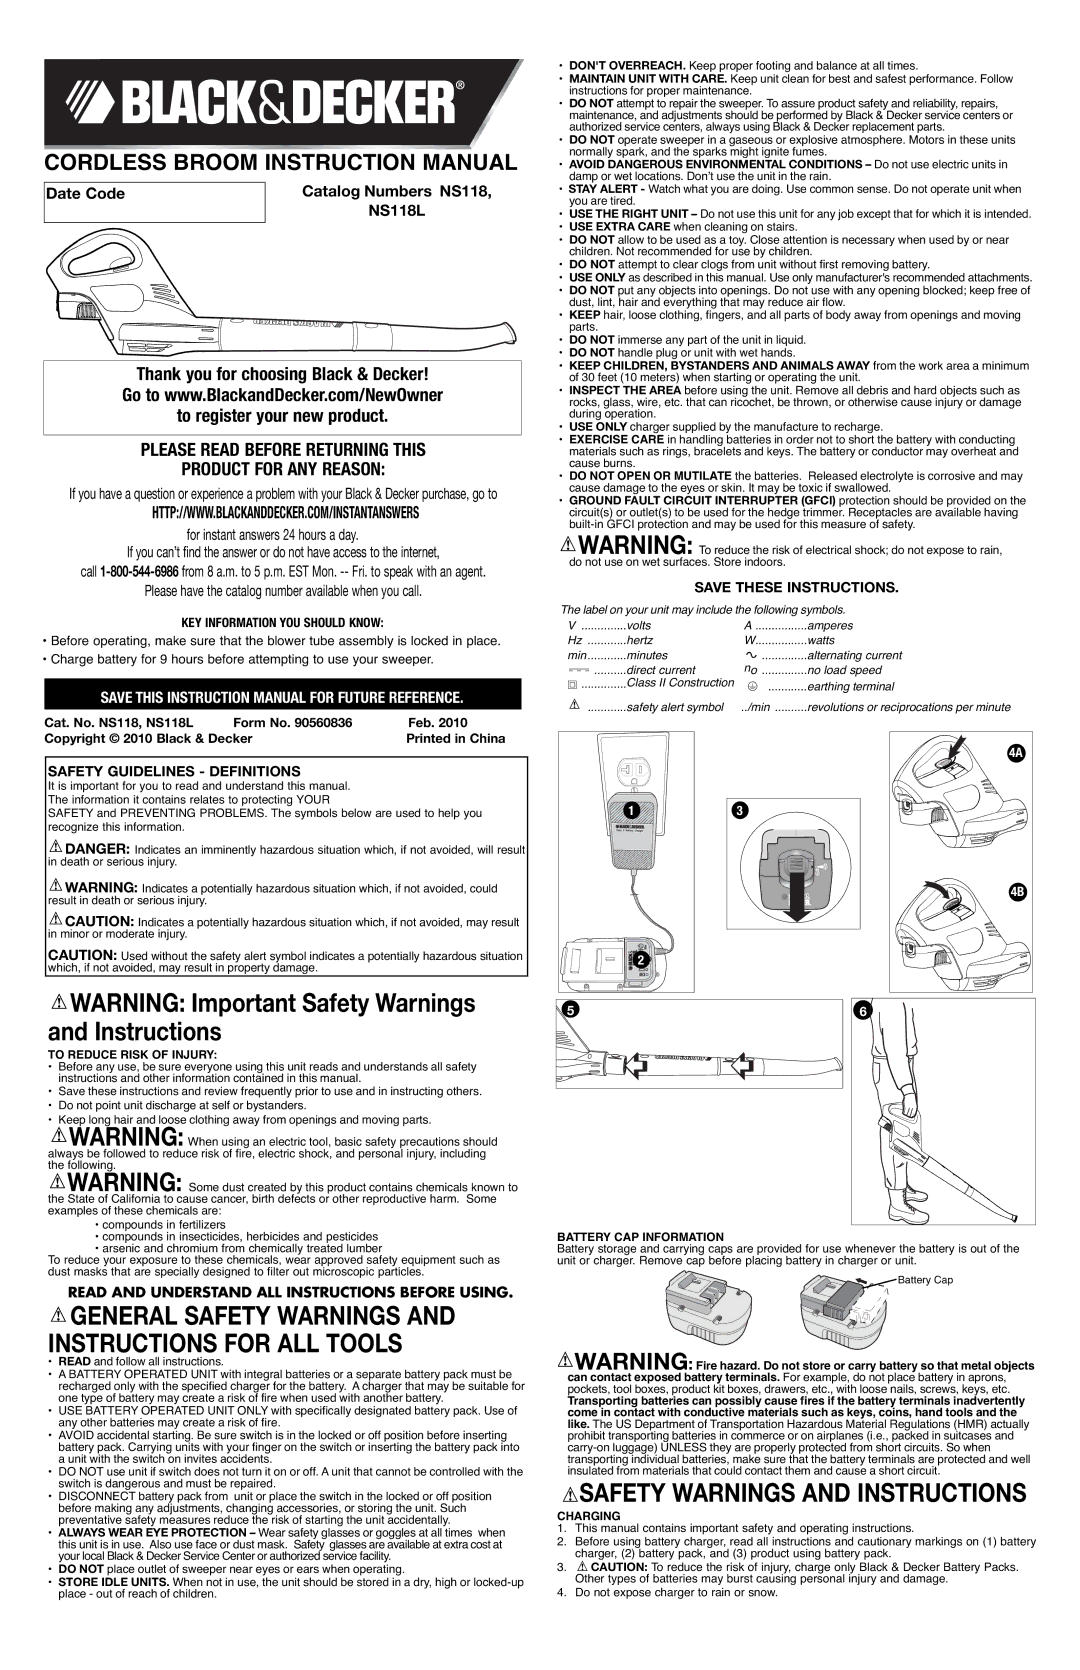 Black & Decker NS118L instruction manual Safety Warnings and Instructions, Safety Guidelines Definitions 